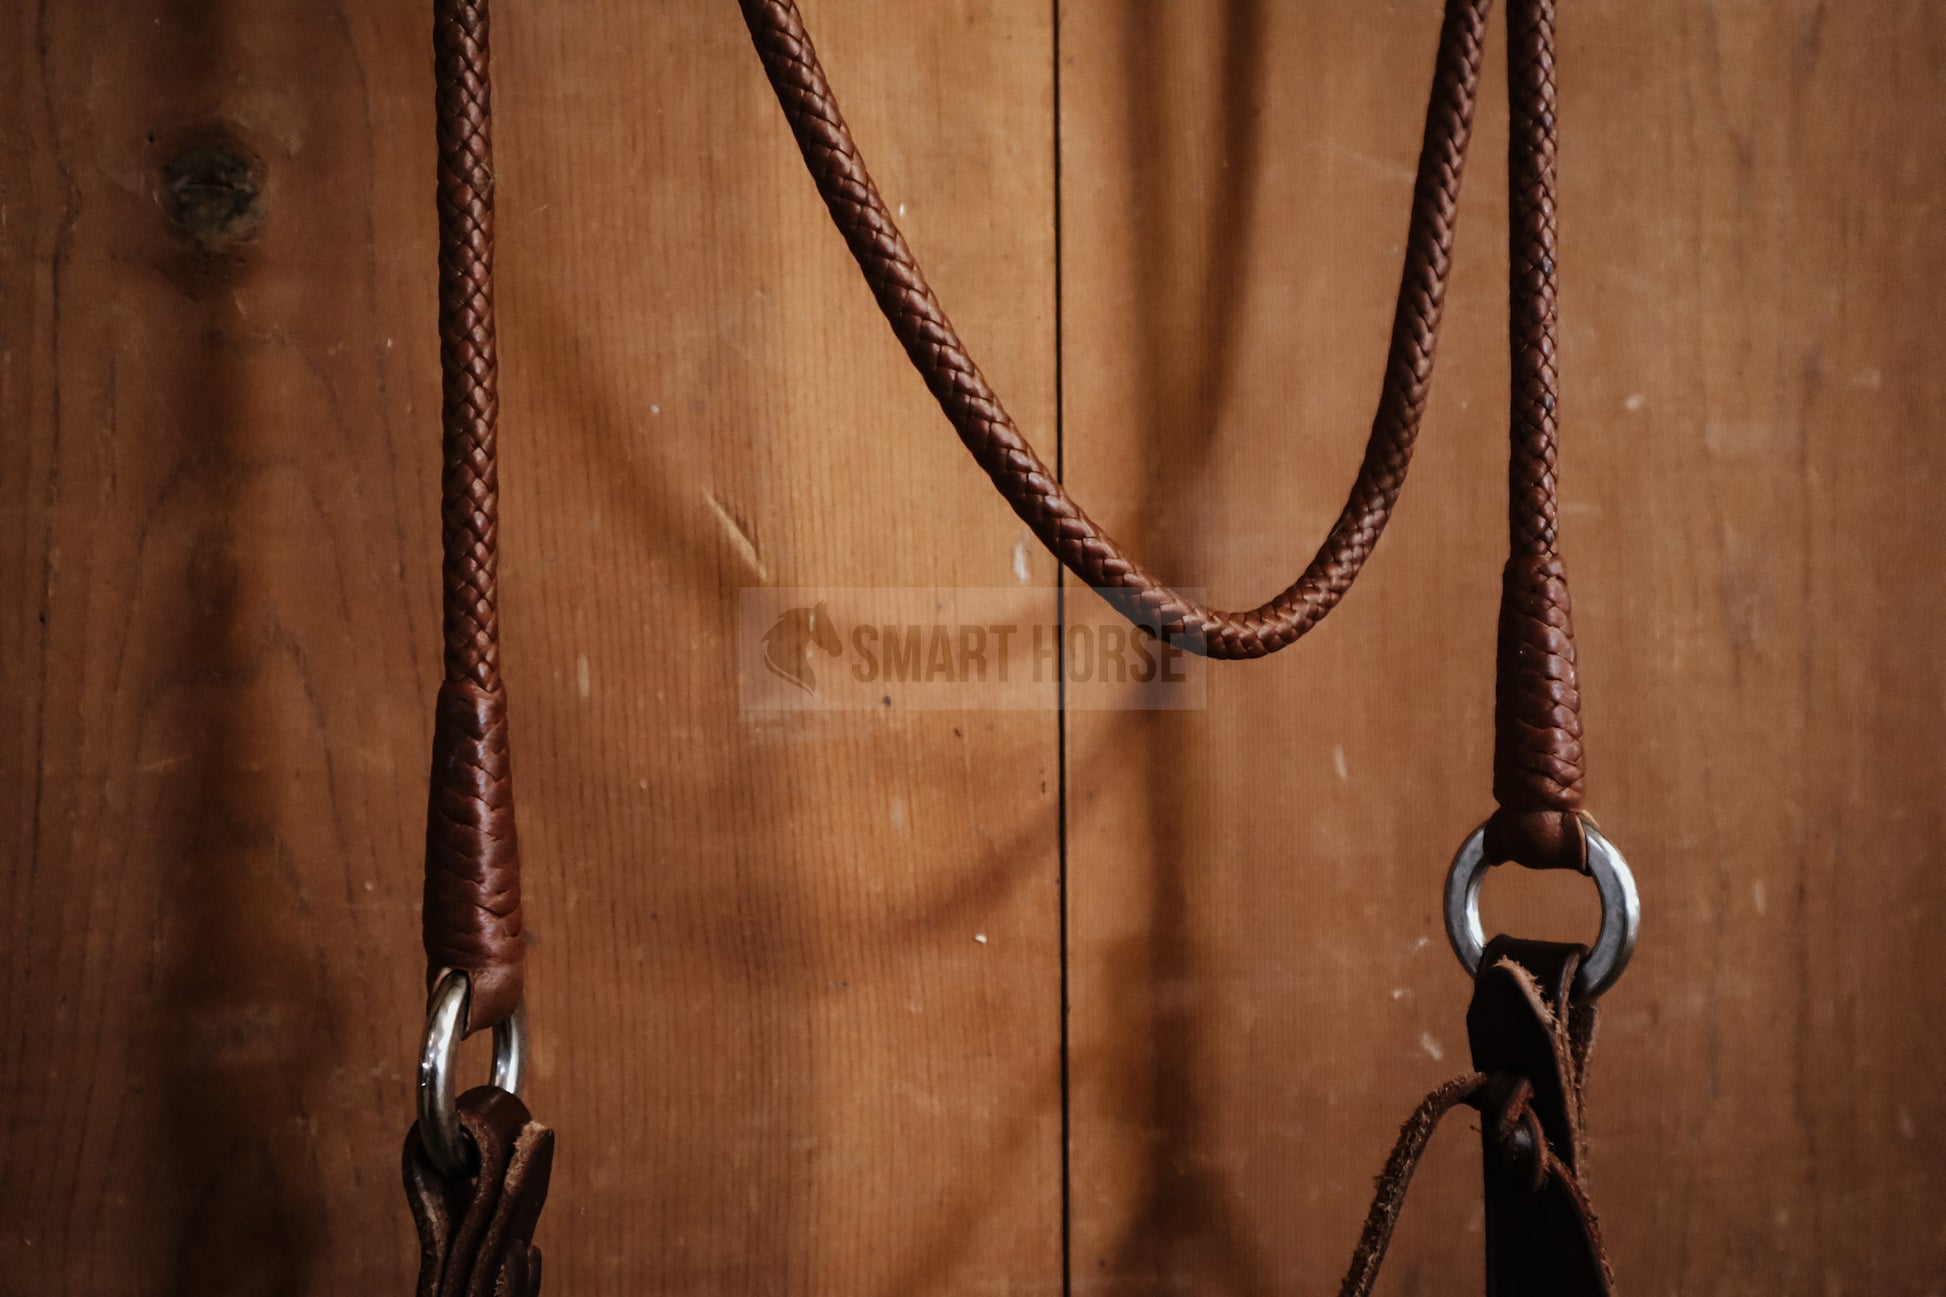 One clip leather reins – Smart Horse